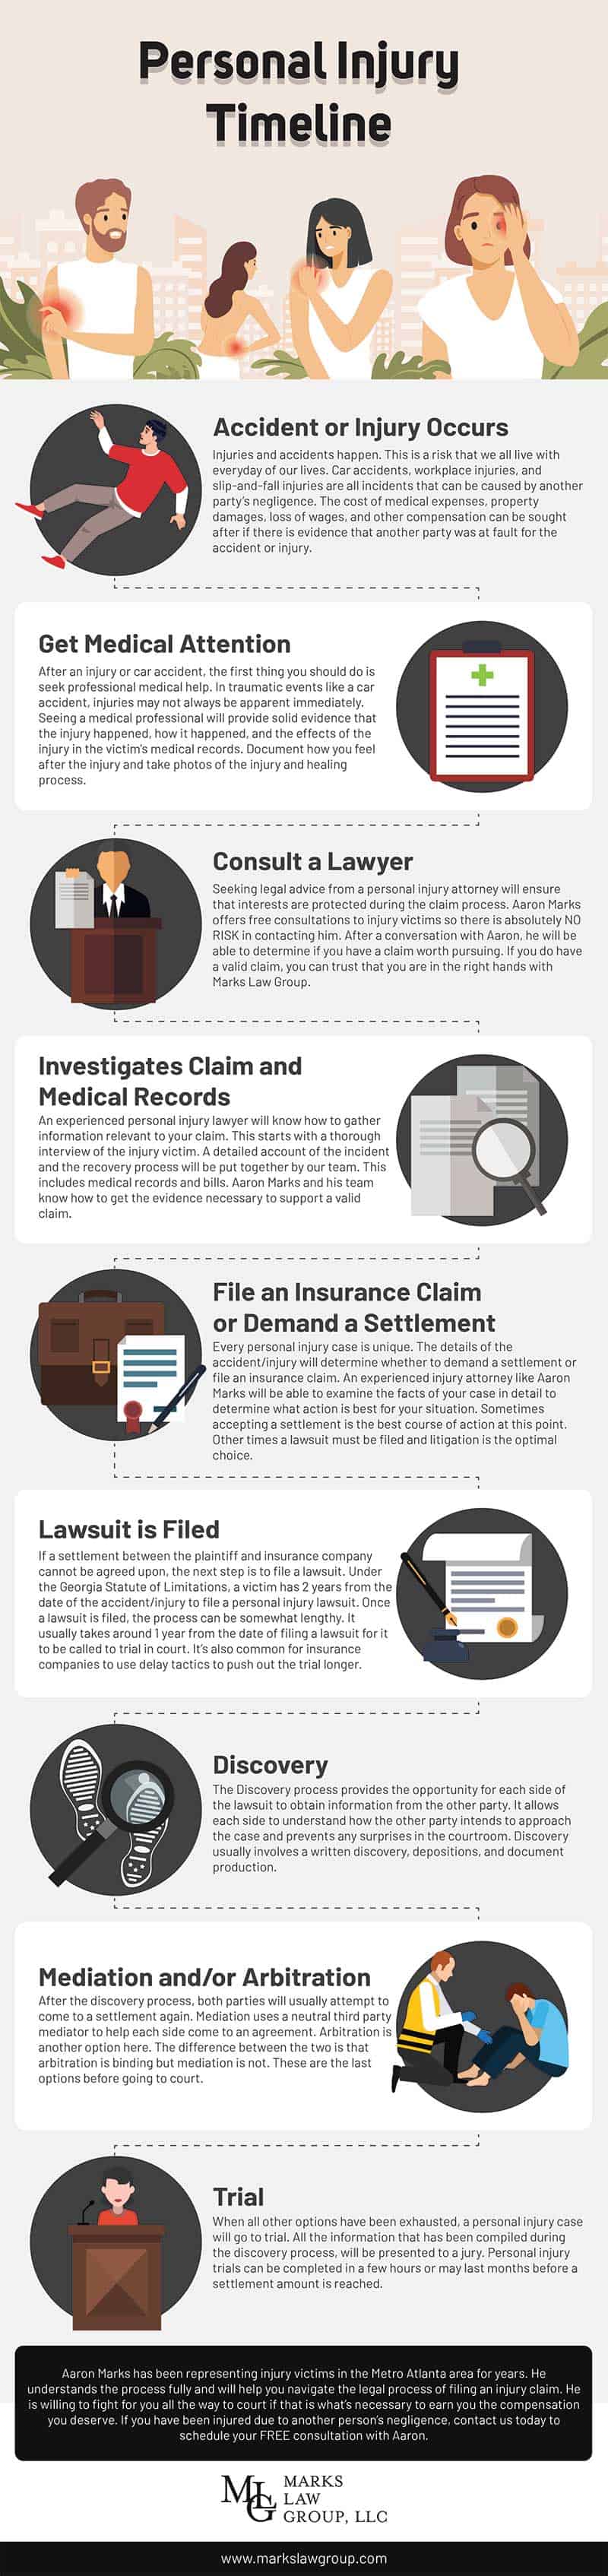 Personal Injury Claim Timeline - Infographic